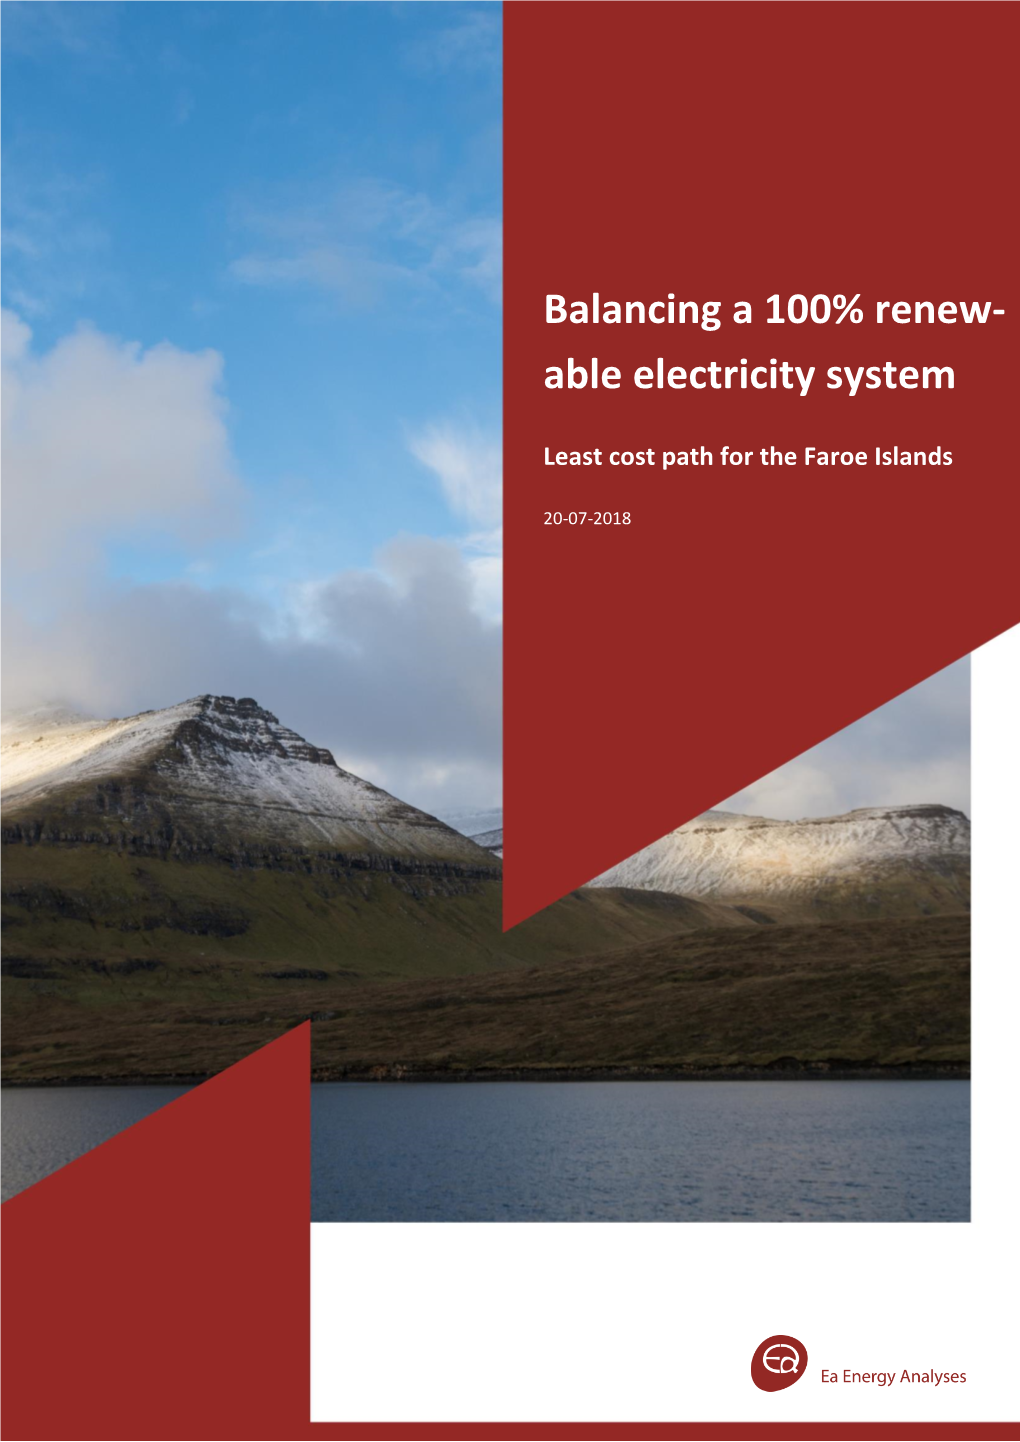 Balancing a 100% Renewable Electricity System, Least Cost Path for the Faroe Islands - 20-07-2018